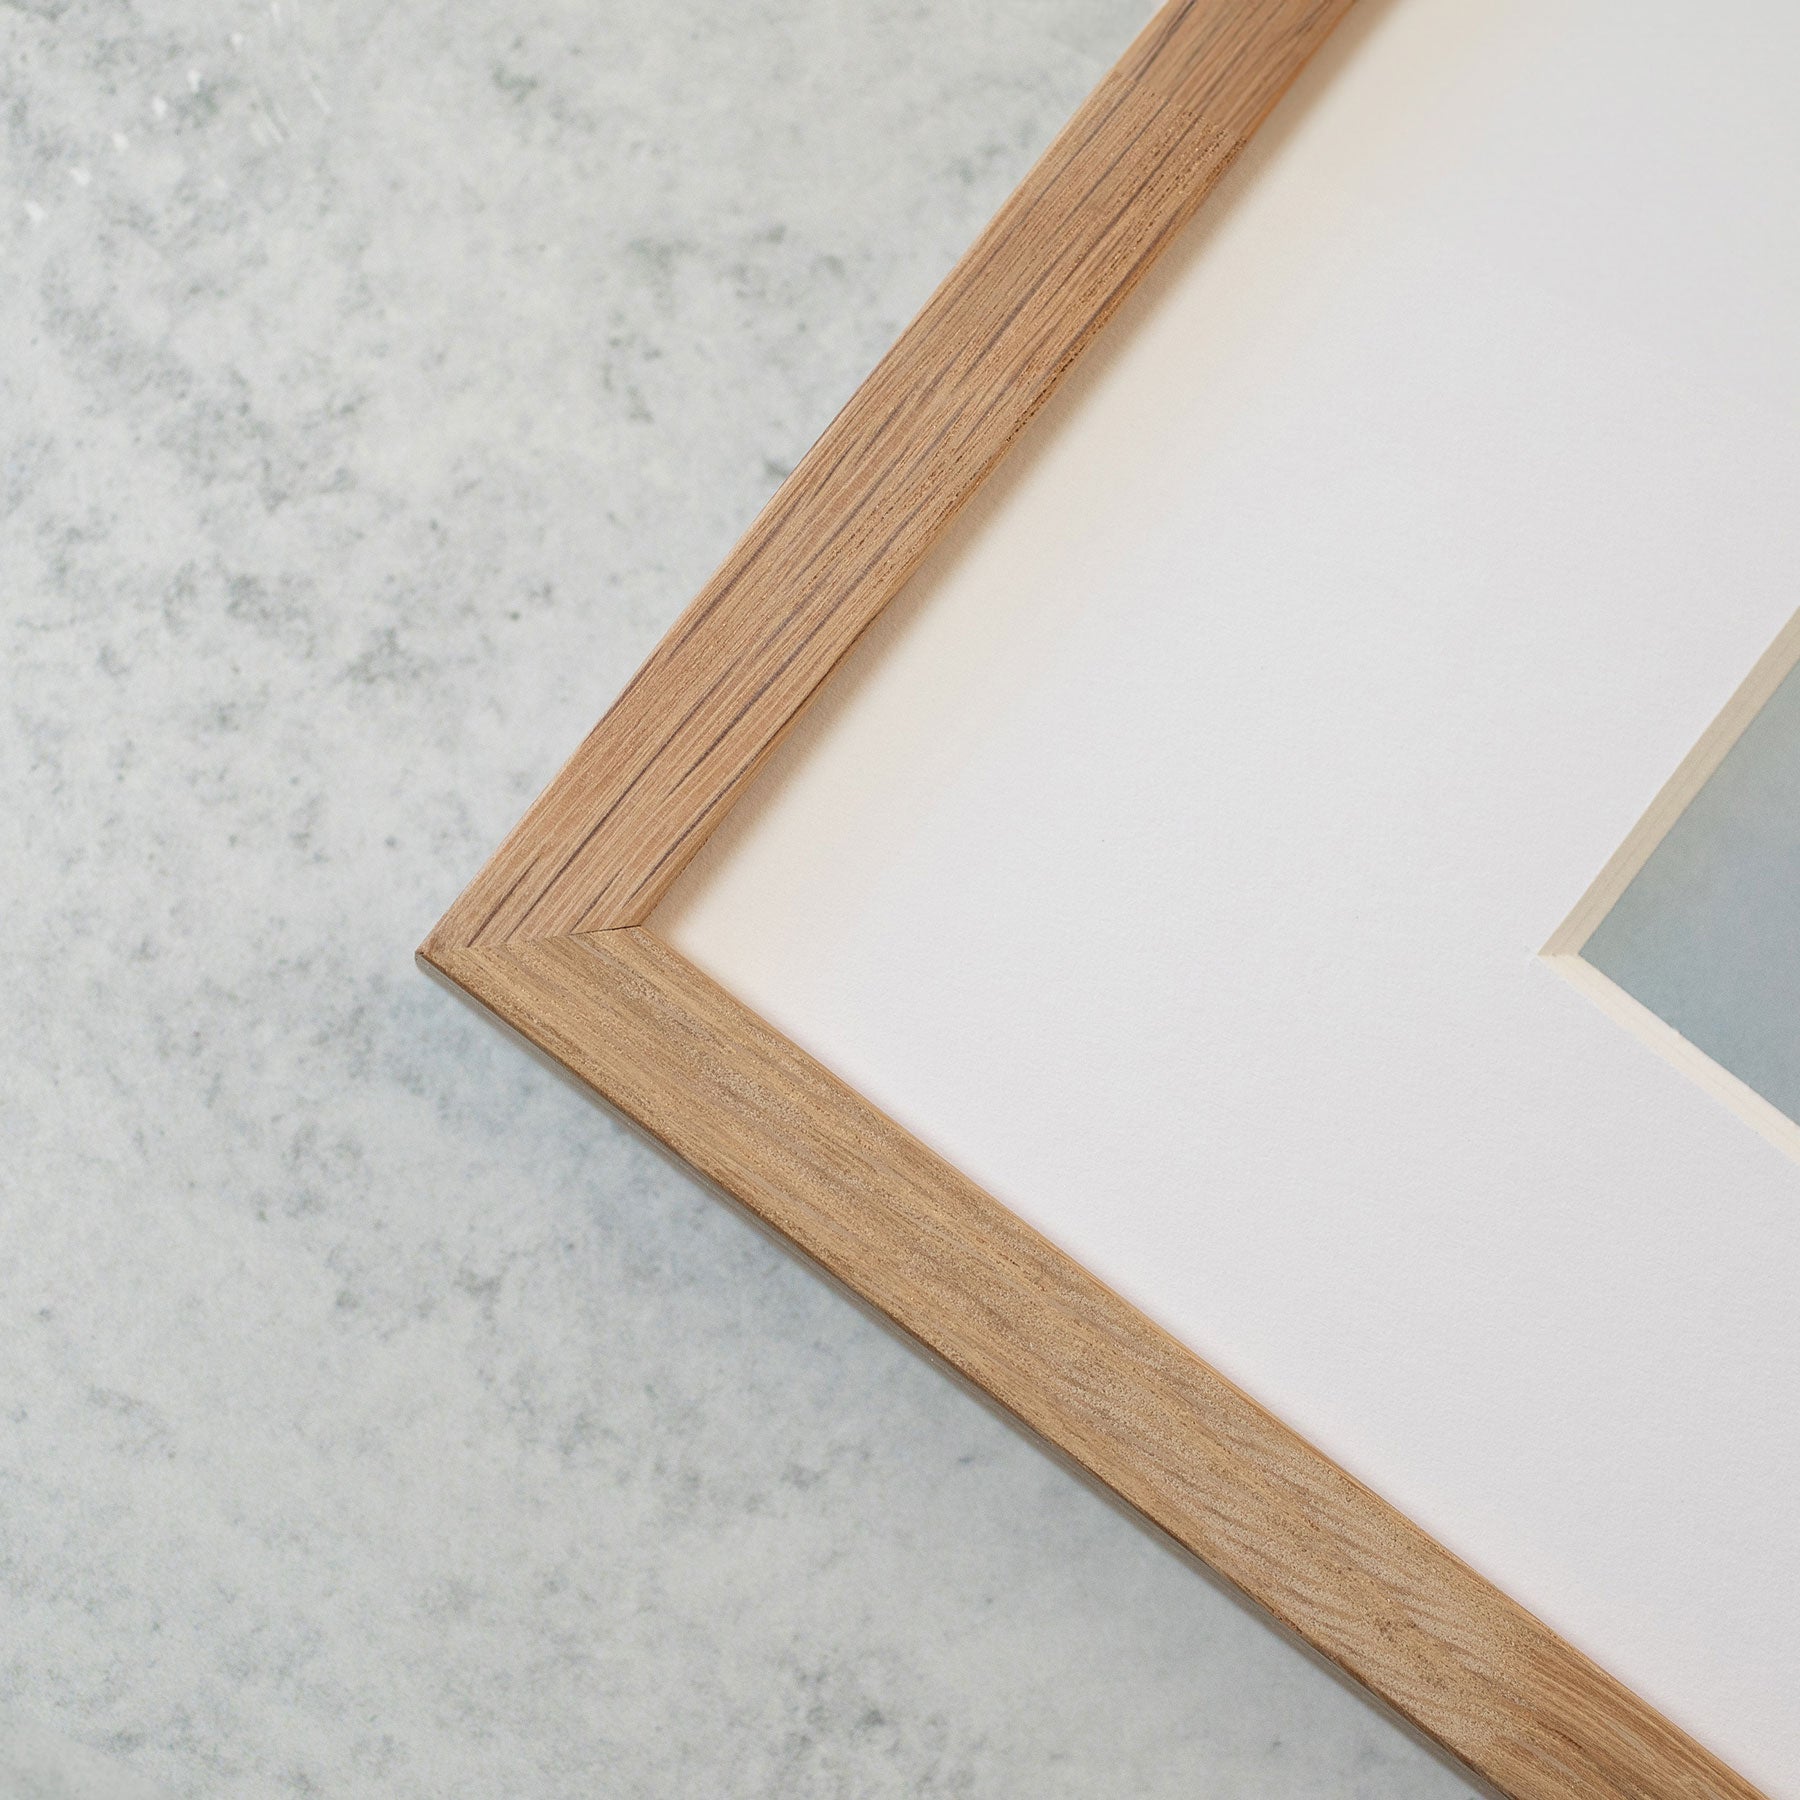 Close-up of a corner of a wooden picture frame on a marble surface, showing detail of the wood grain and part of the white mat inside the frame with the Offley Green &#39;Blue Venice&#39; Venice Beach Sign Print on archival photographic paper.